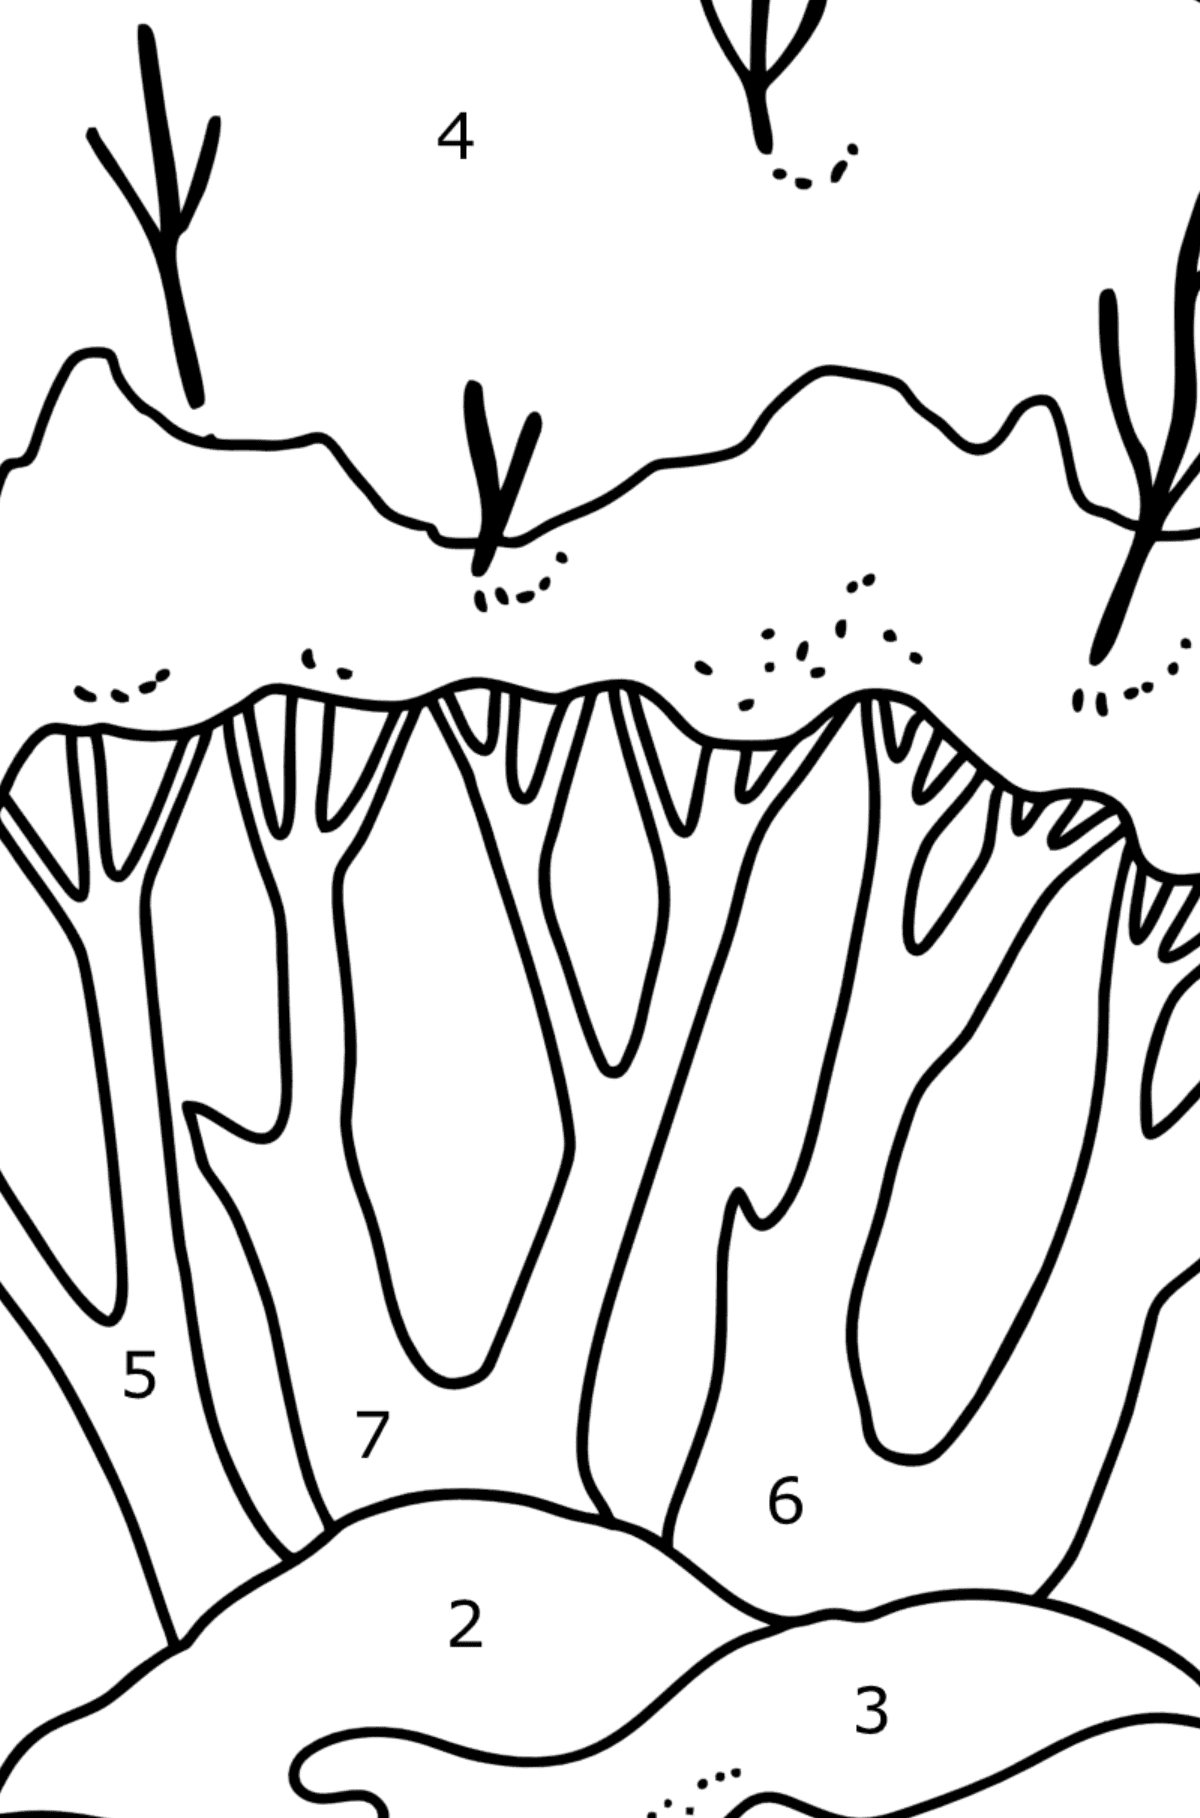 Winter Trees coloring page - Coloring by Numbers for Kids